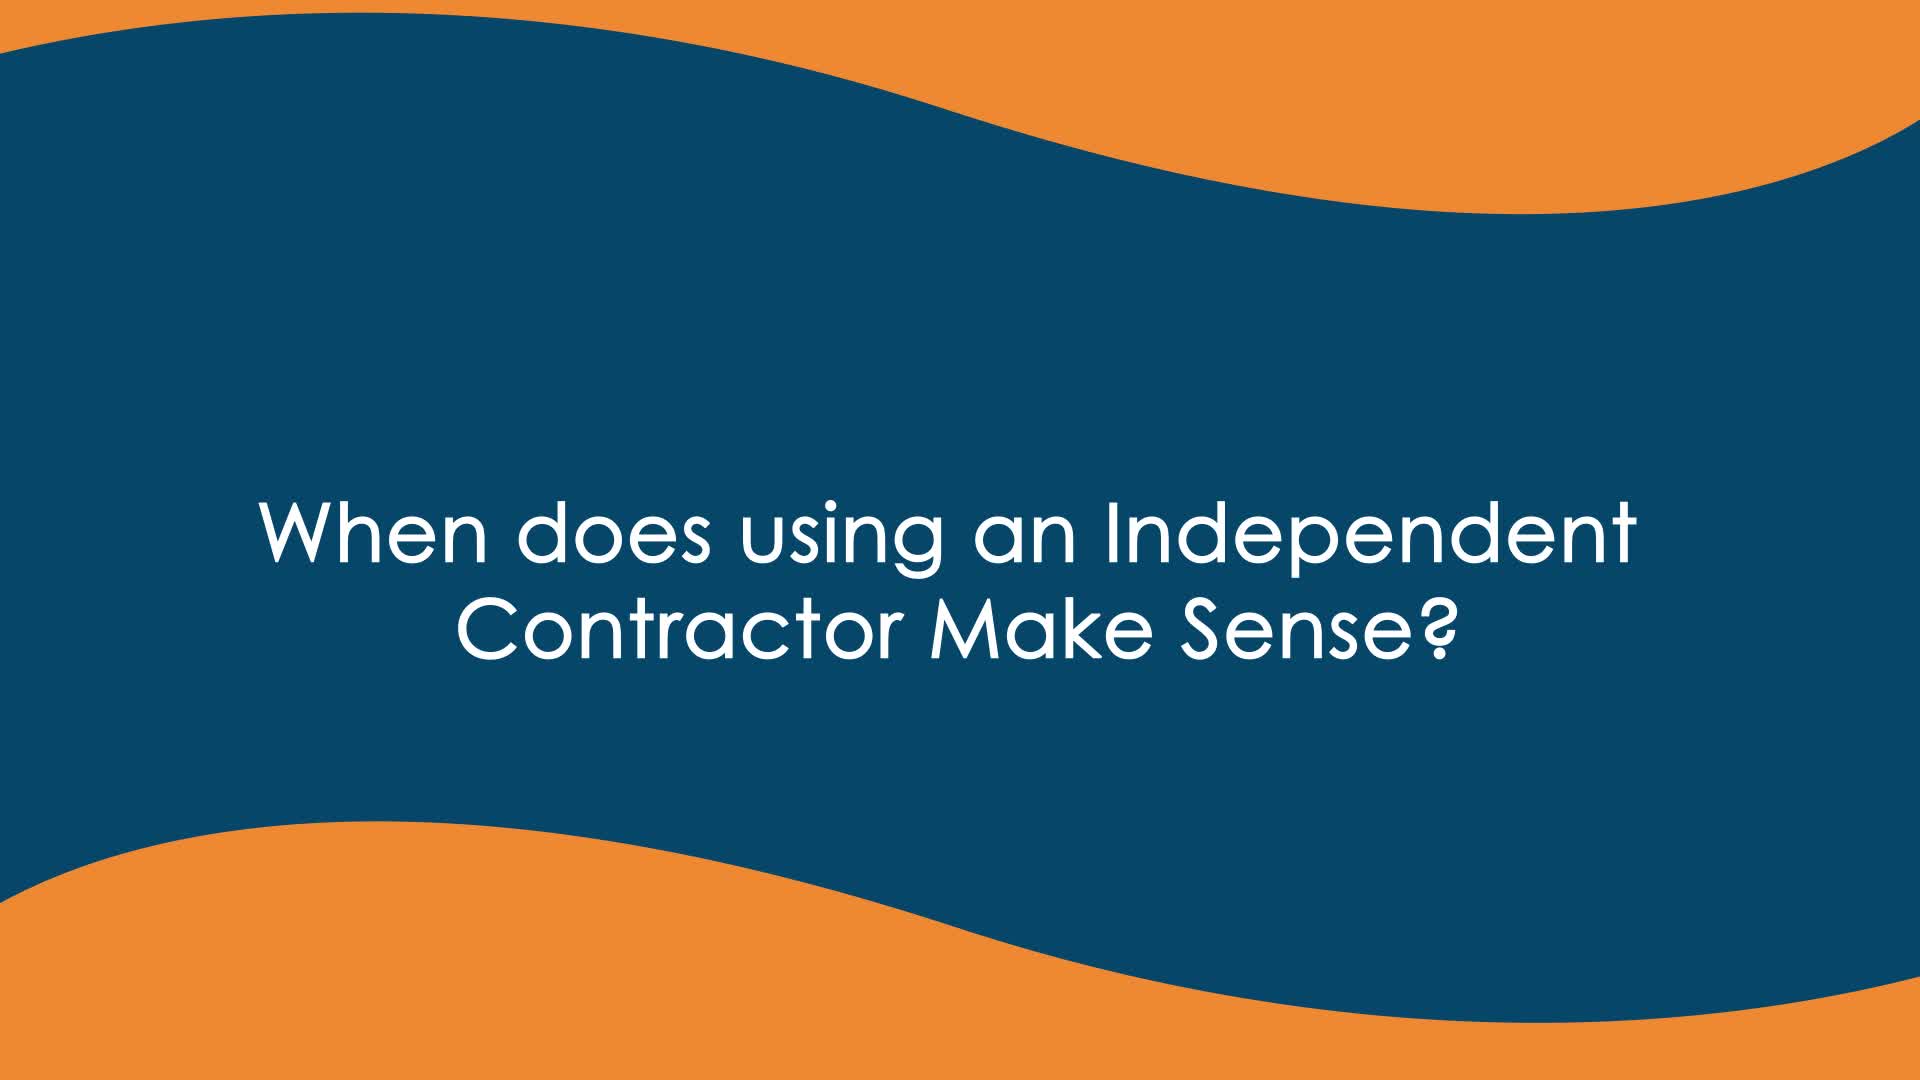 When does using a contractor make sense